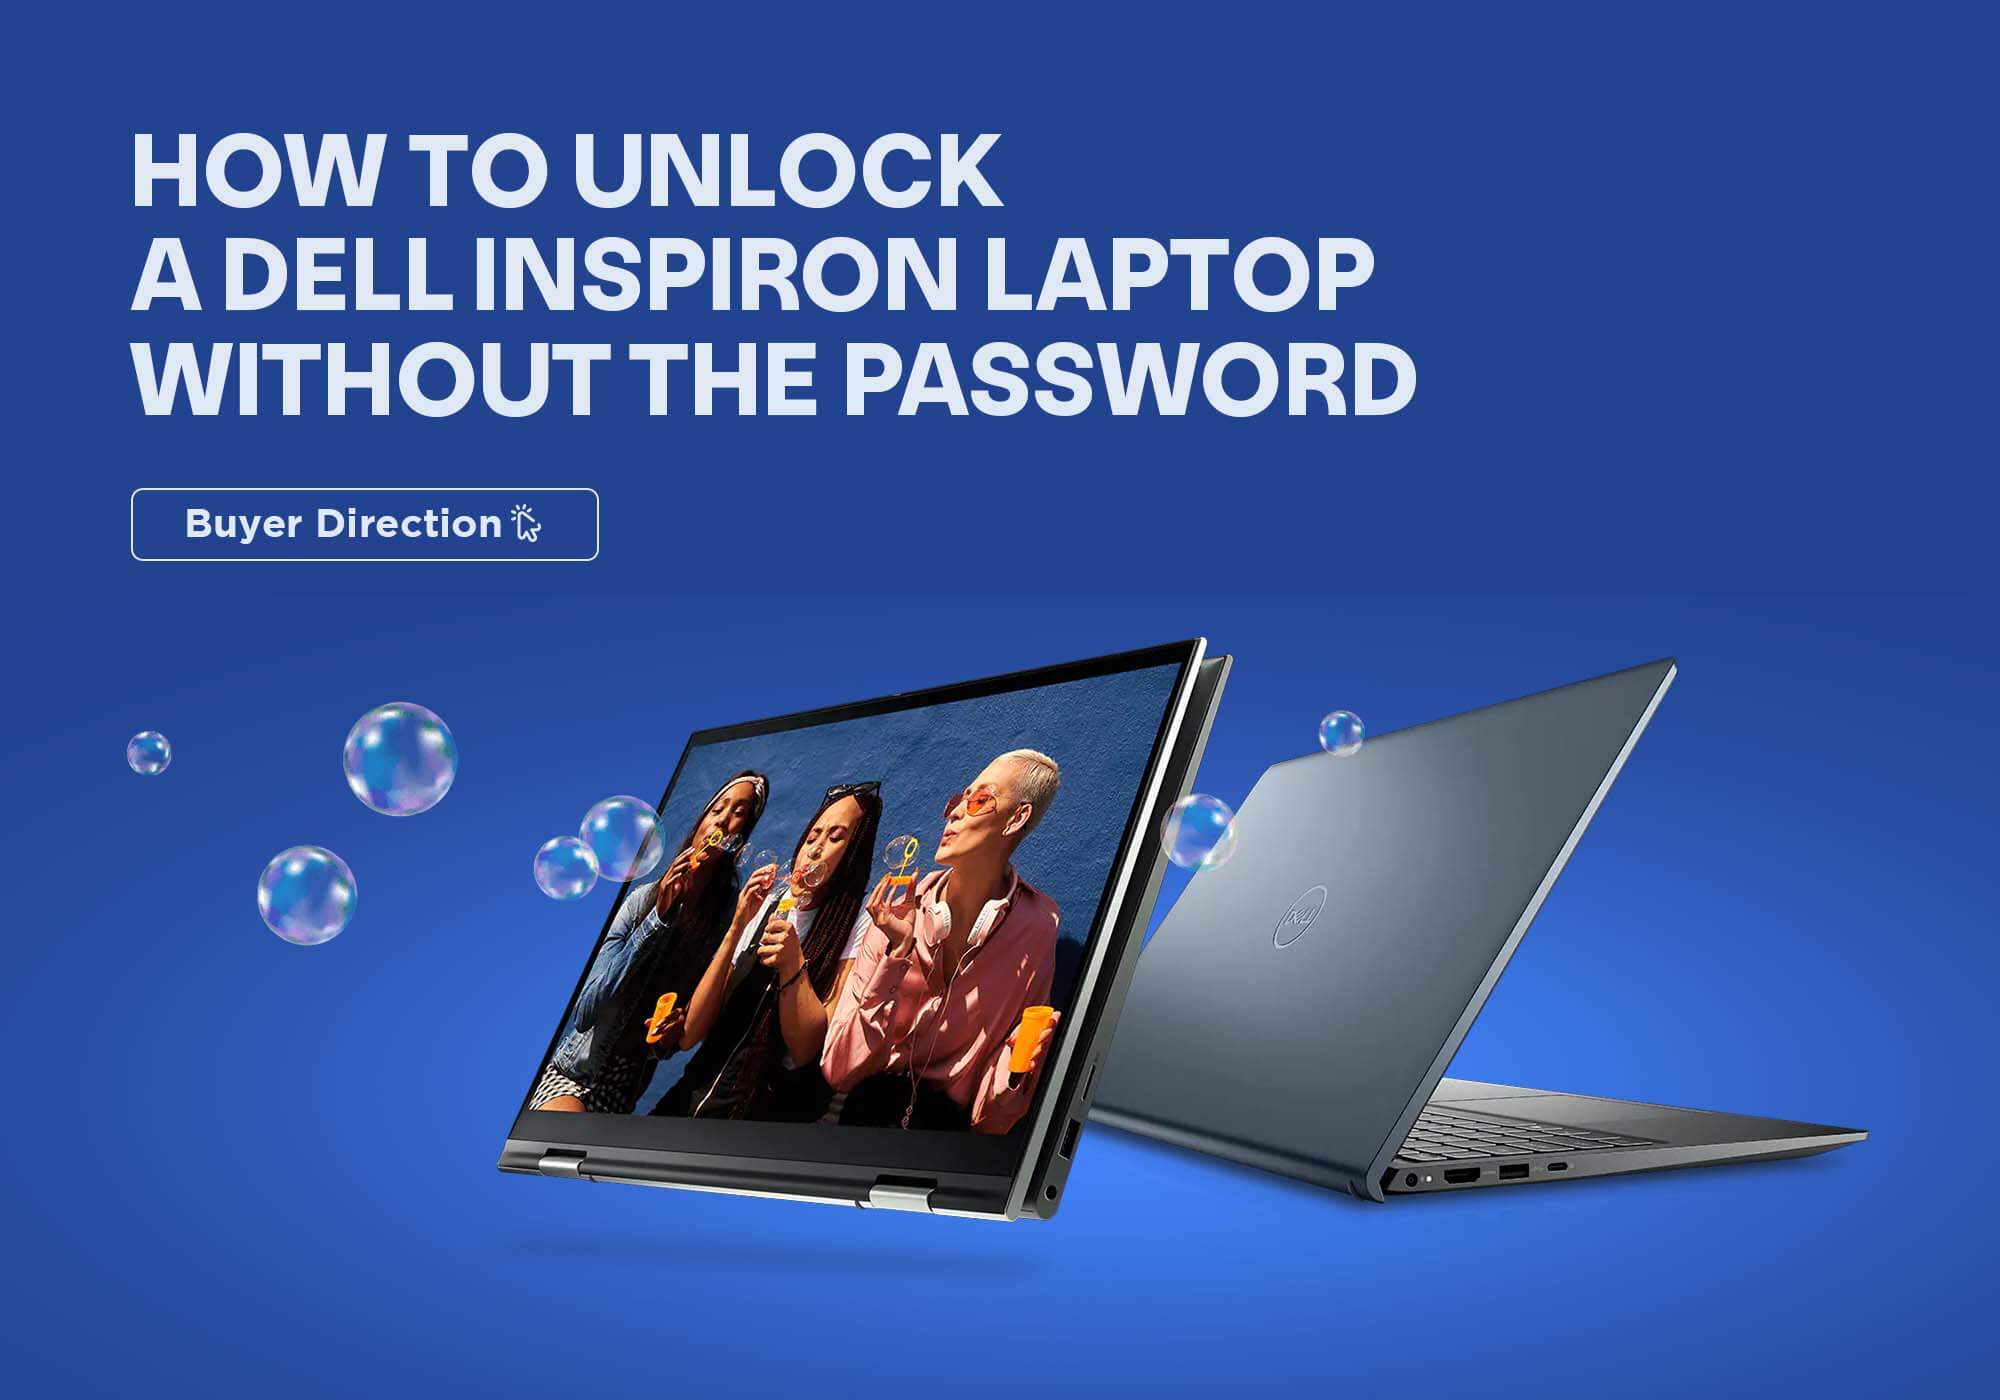 How to Unlock a Dell Inspiron Laptop without the Password